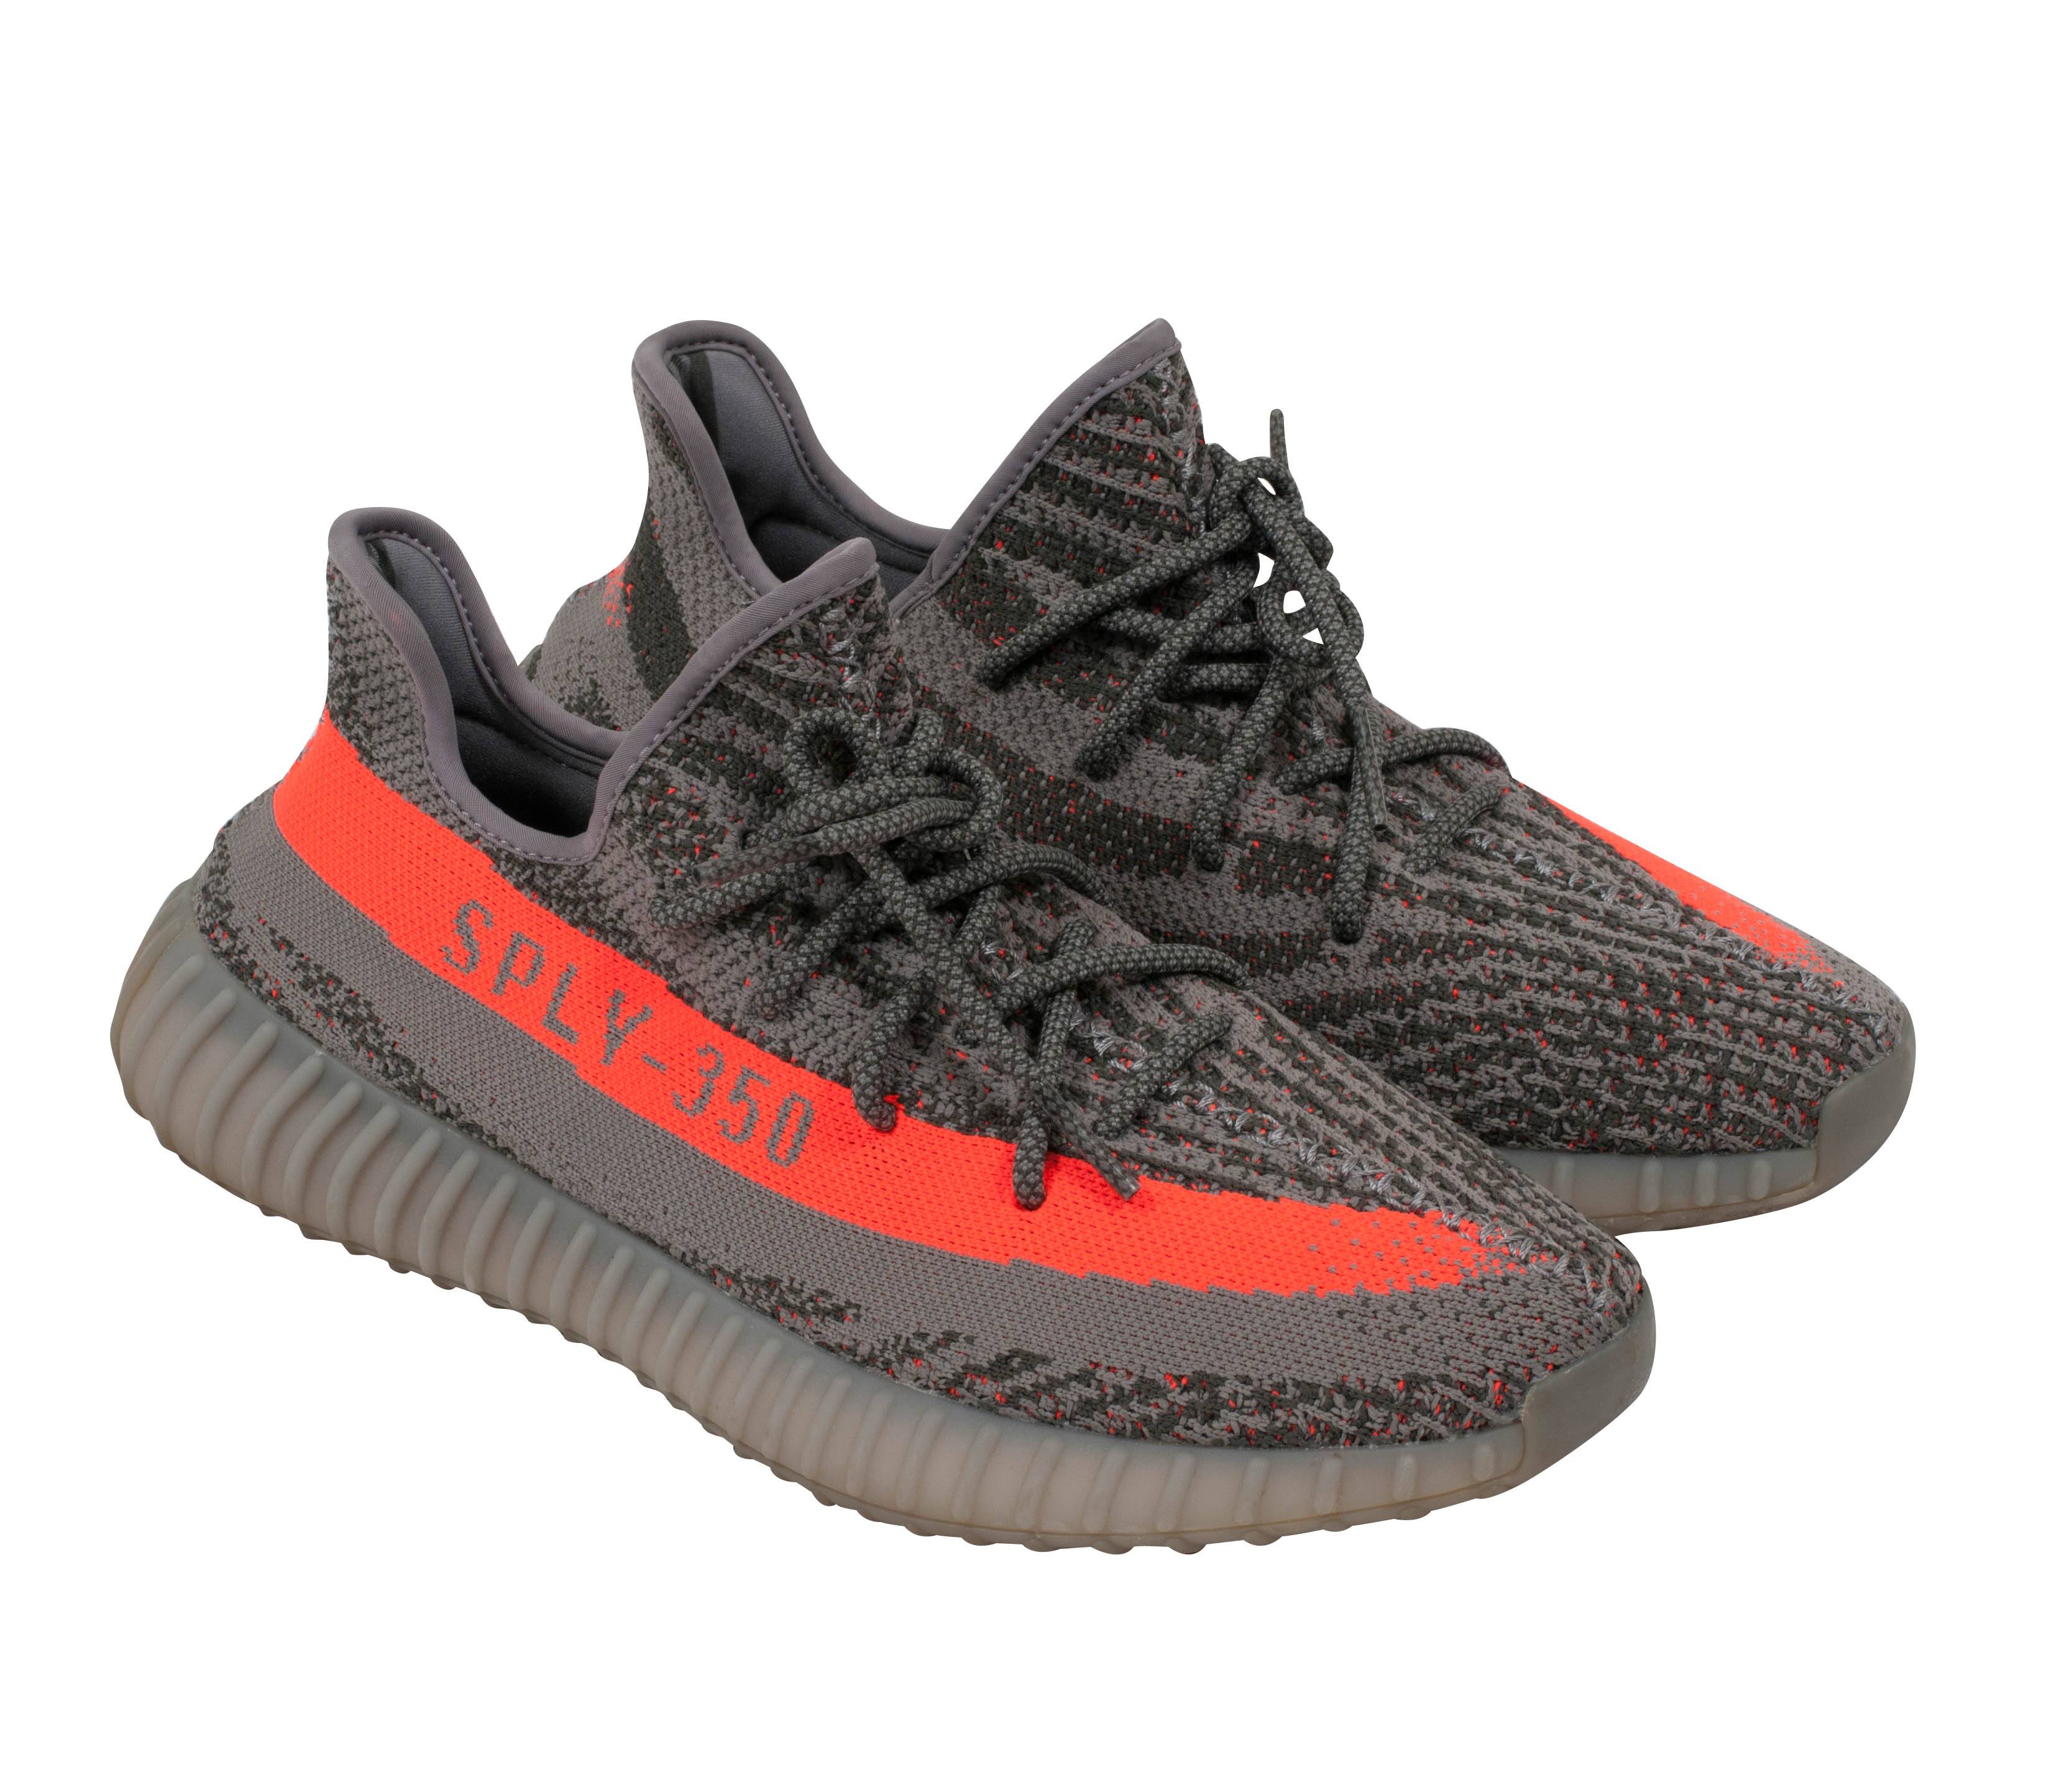 Yeezy Boost 380 Sizing: How Do They Fit? | The Sole Supplier